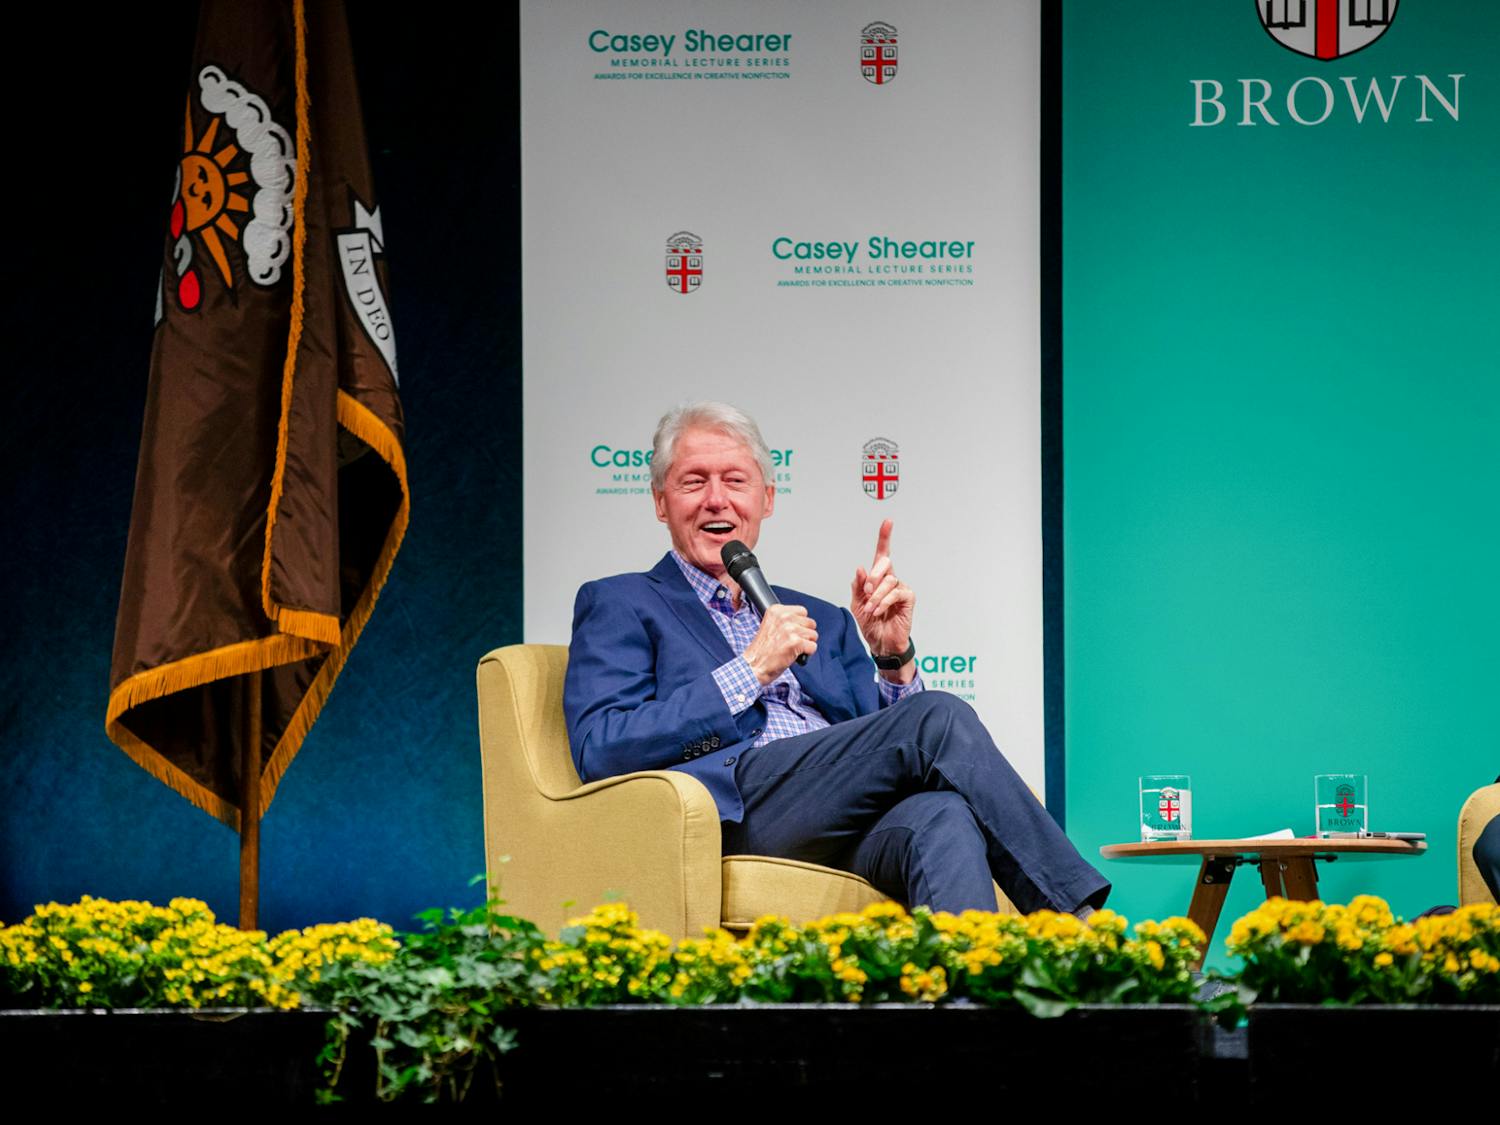 Former U.S. President Bill Clinton spoke with Derek Shearer about current political issues, his own personal interests and gave career advice to future generations.